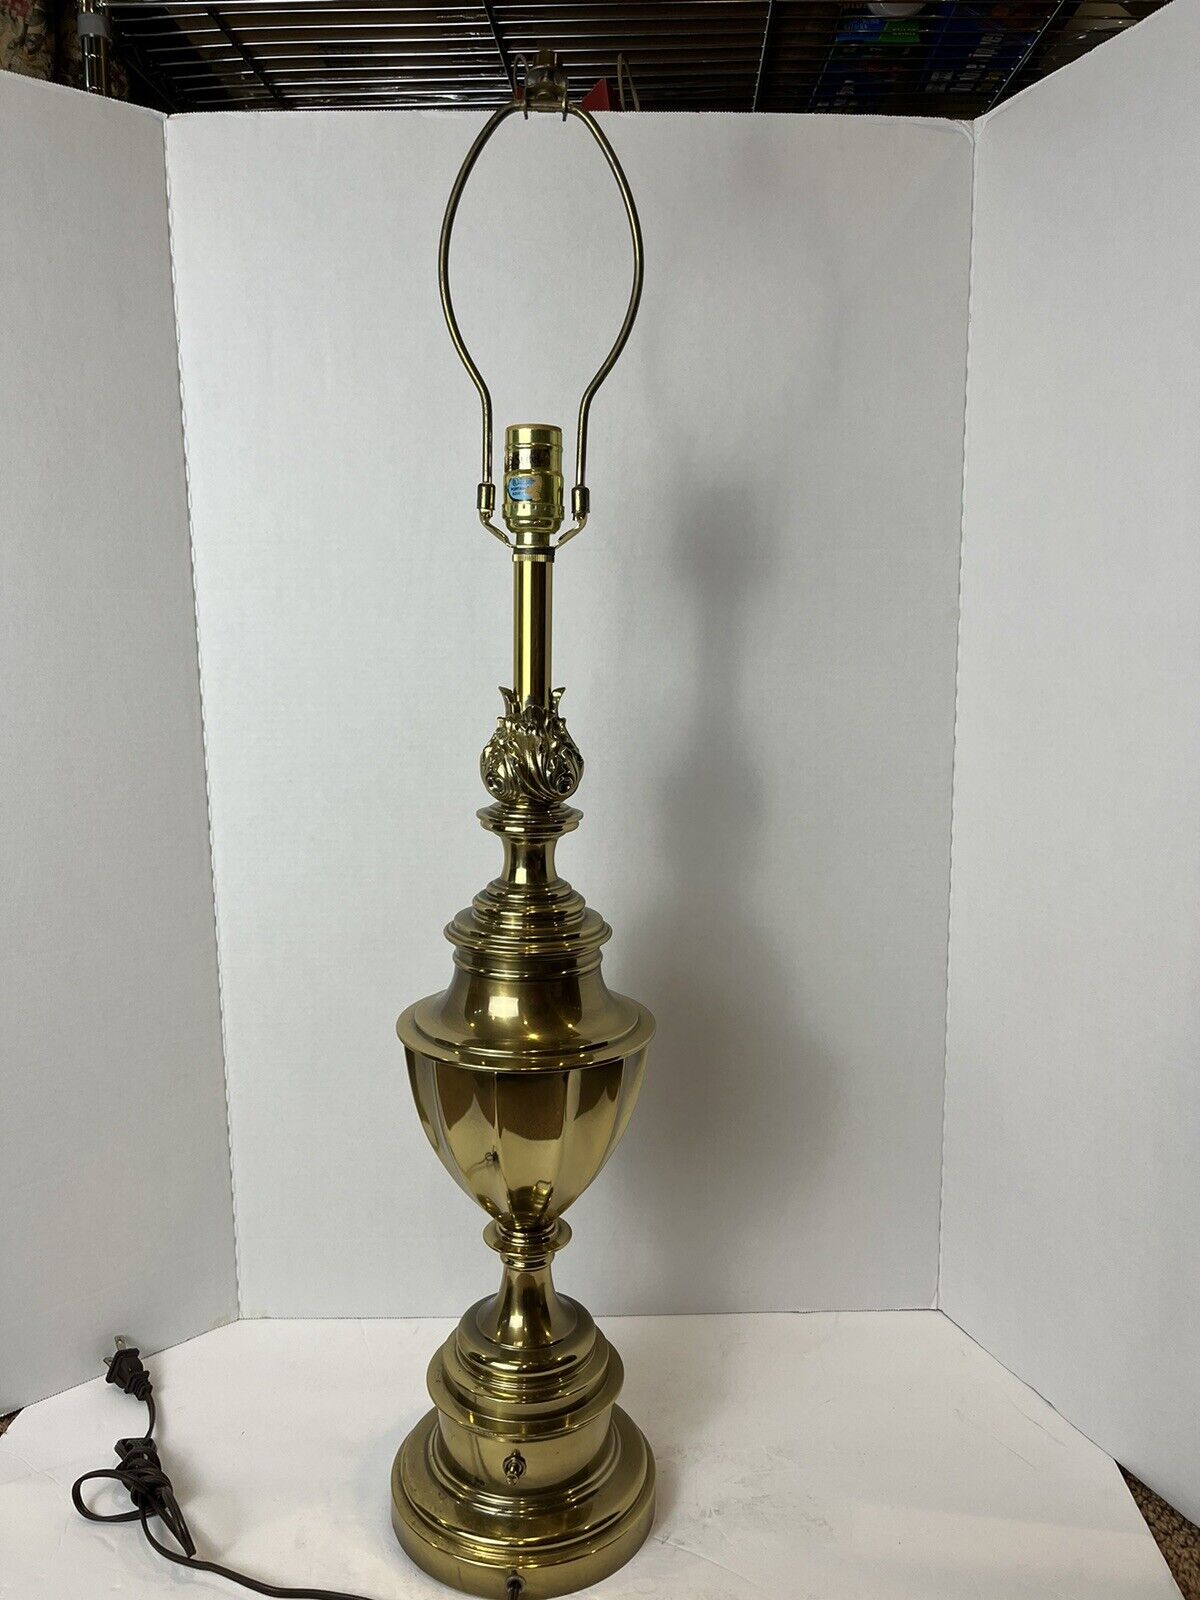 Vintage Stiffel Solid Brass Table Lamp Torch Flame Design 11 LBS Works 34”